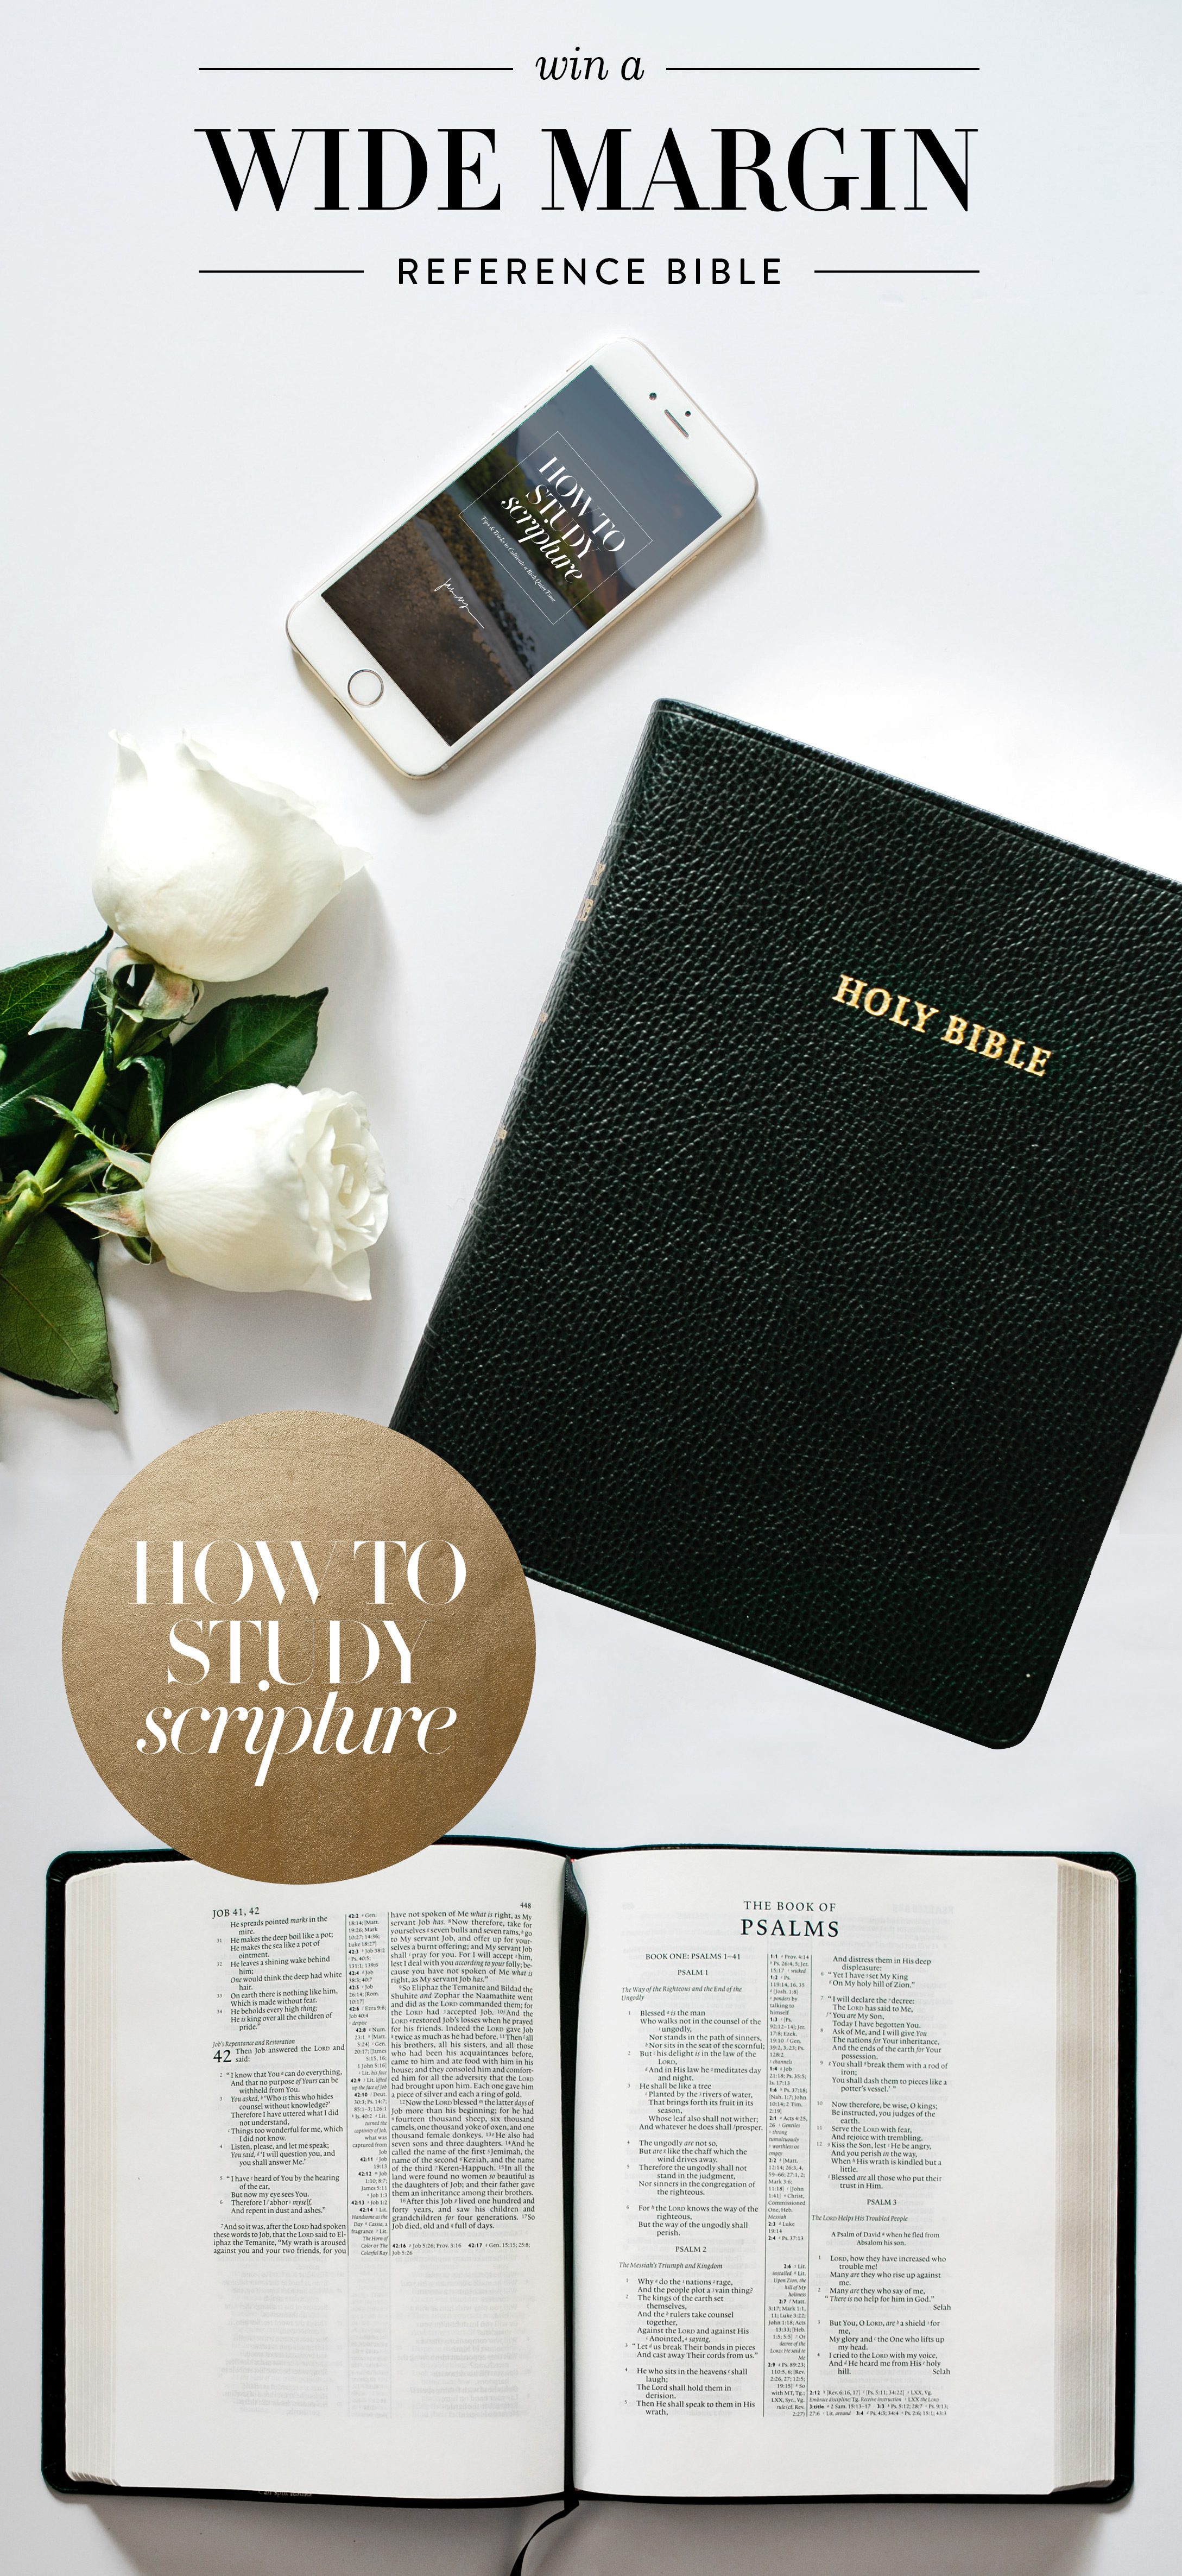 See Jane Write: Wide Margin Reference Bible Giveaway